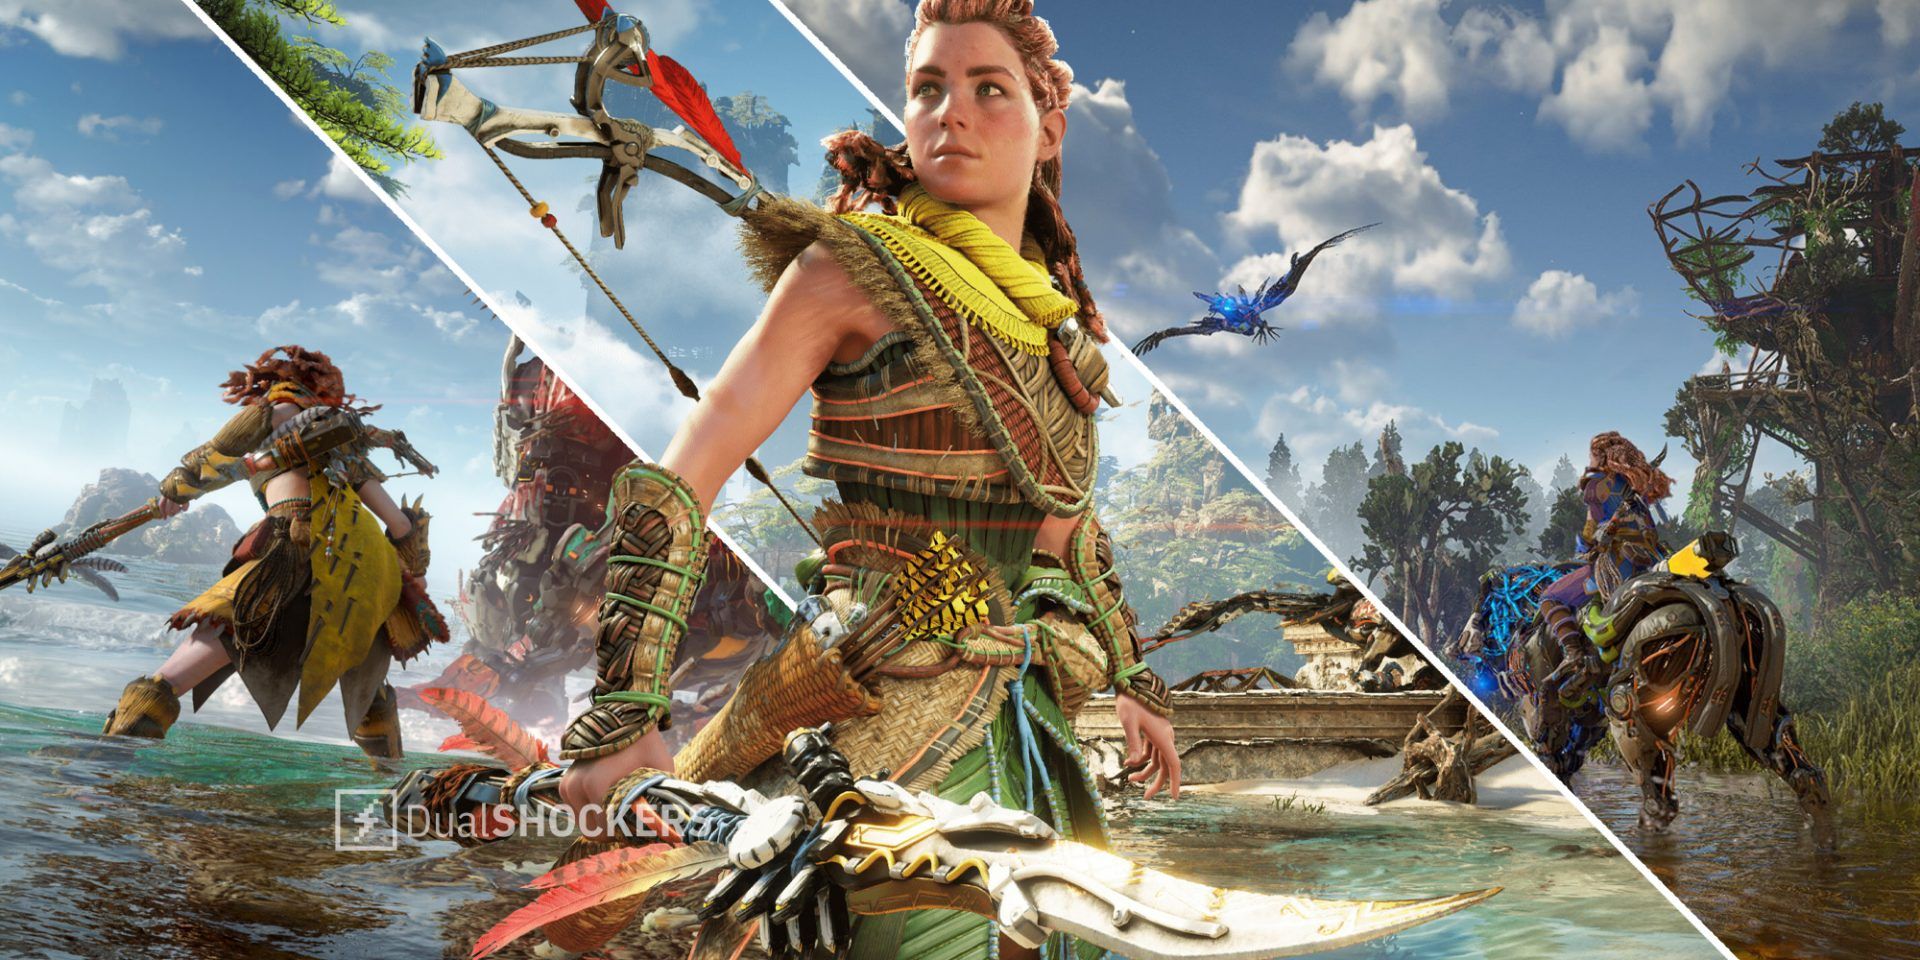 Horizon Forbidden West Aloy fighting a Tremortusk on left, Aloy posing with bow and arrow in middle, Aloy riding a Bristleback on right